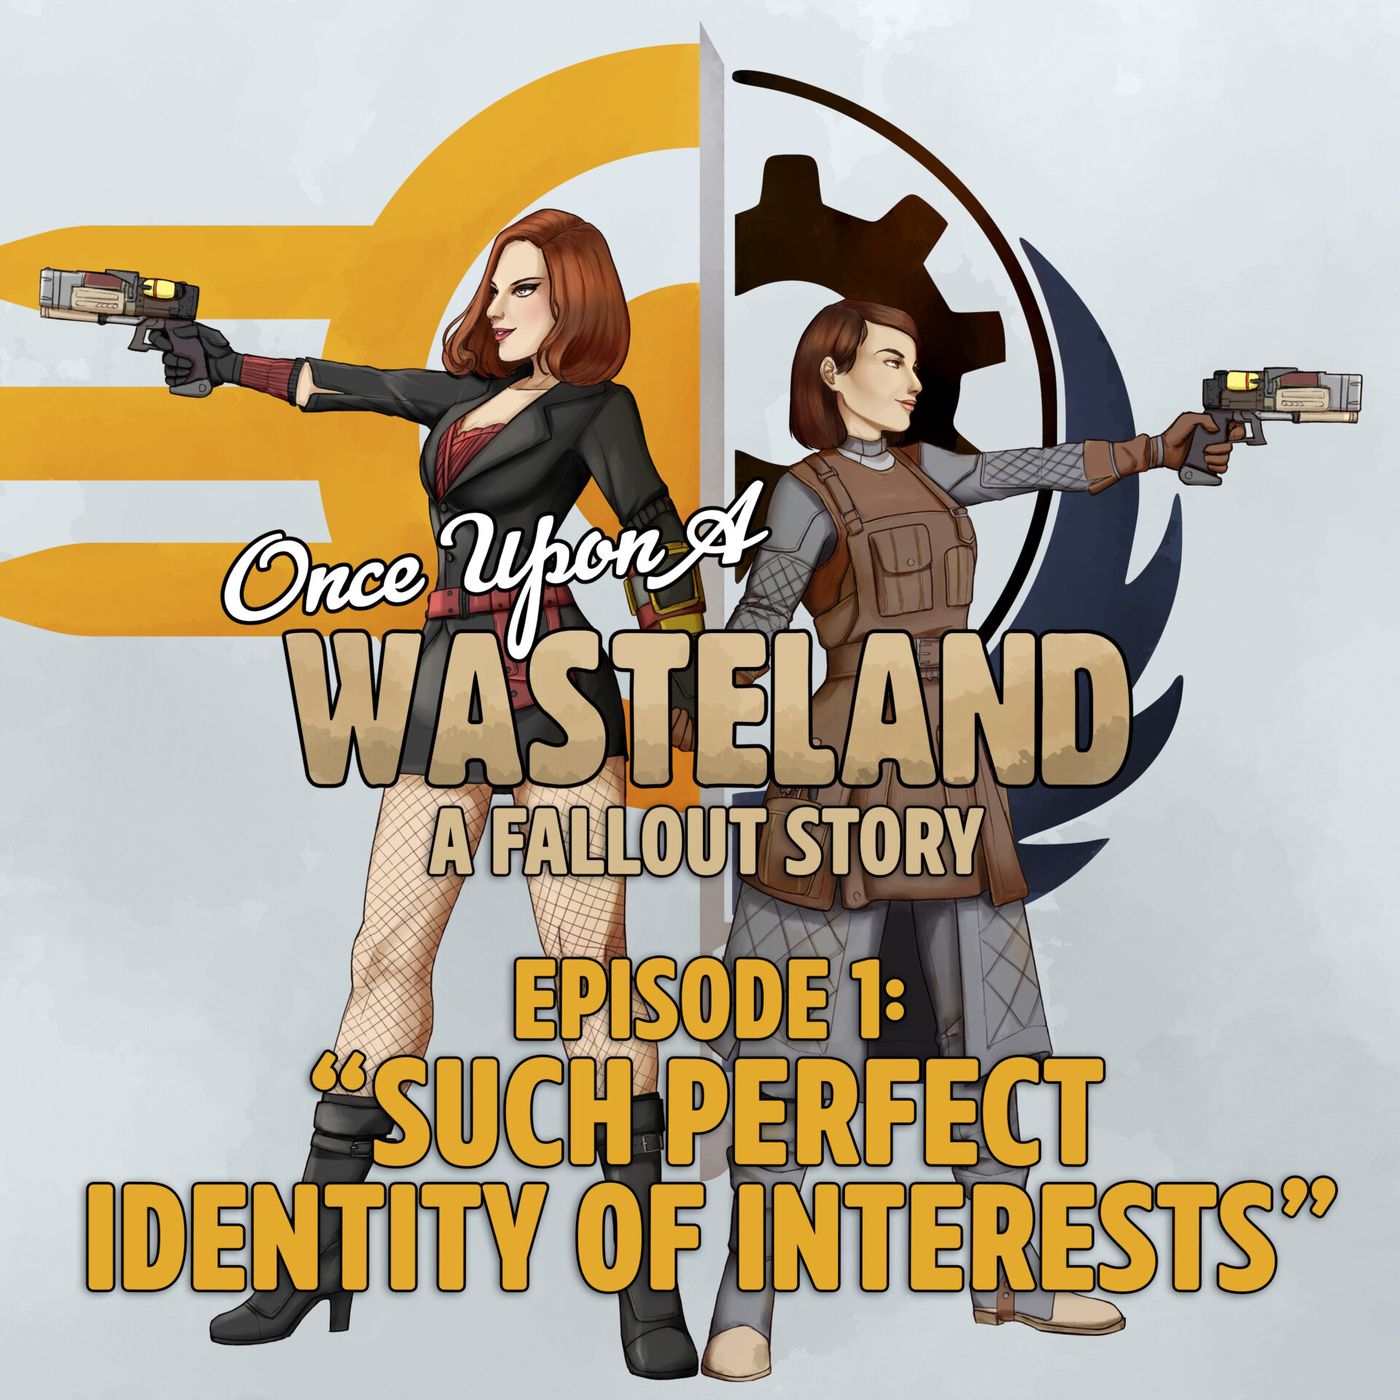 Such Perfect Identity of Interests by Once Upon a Wasteland